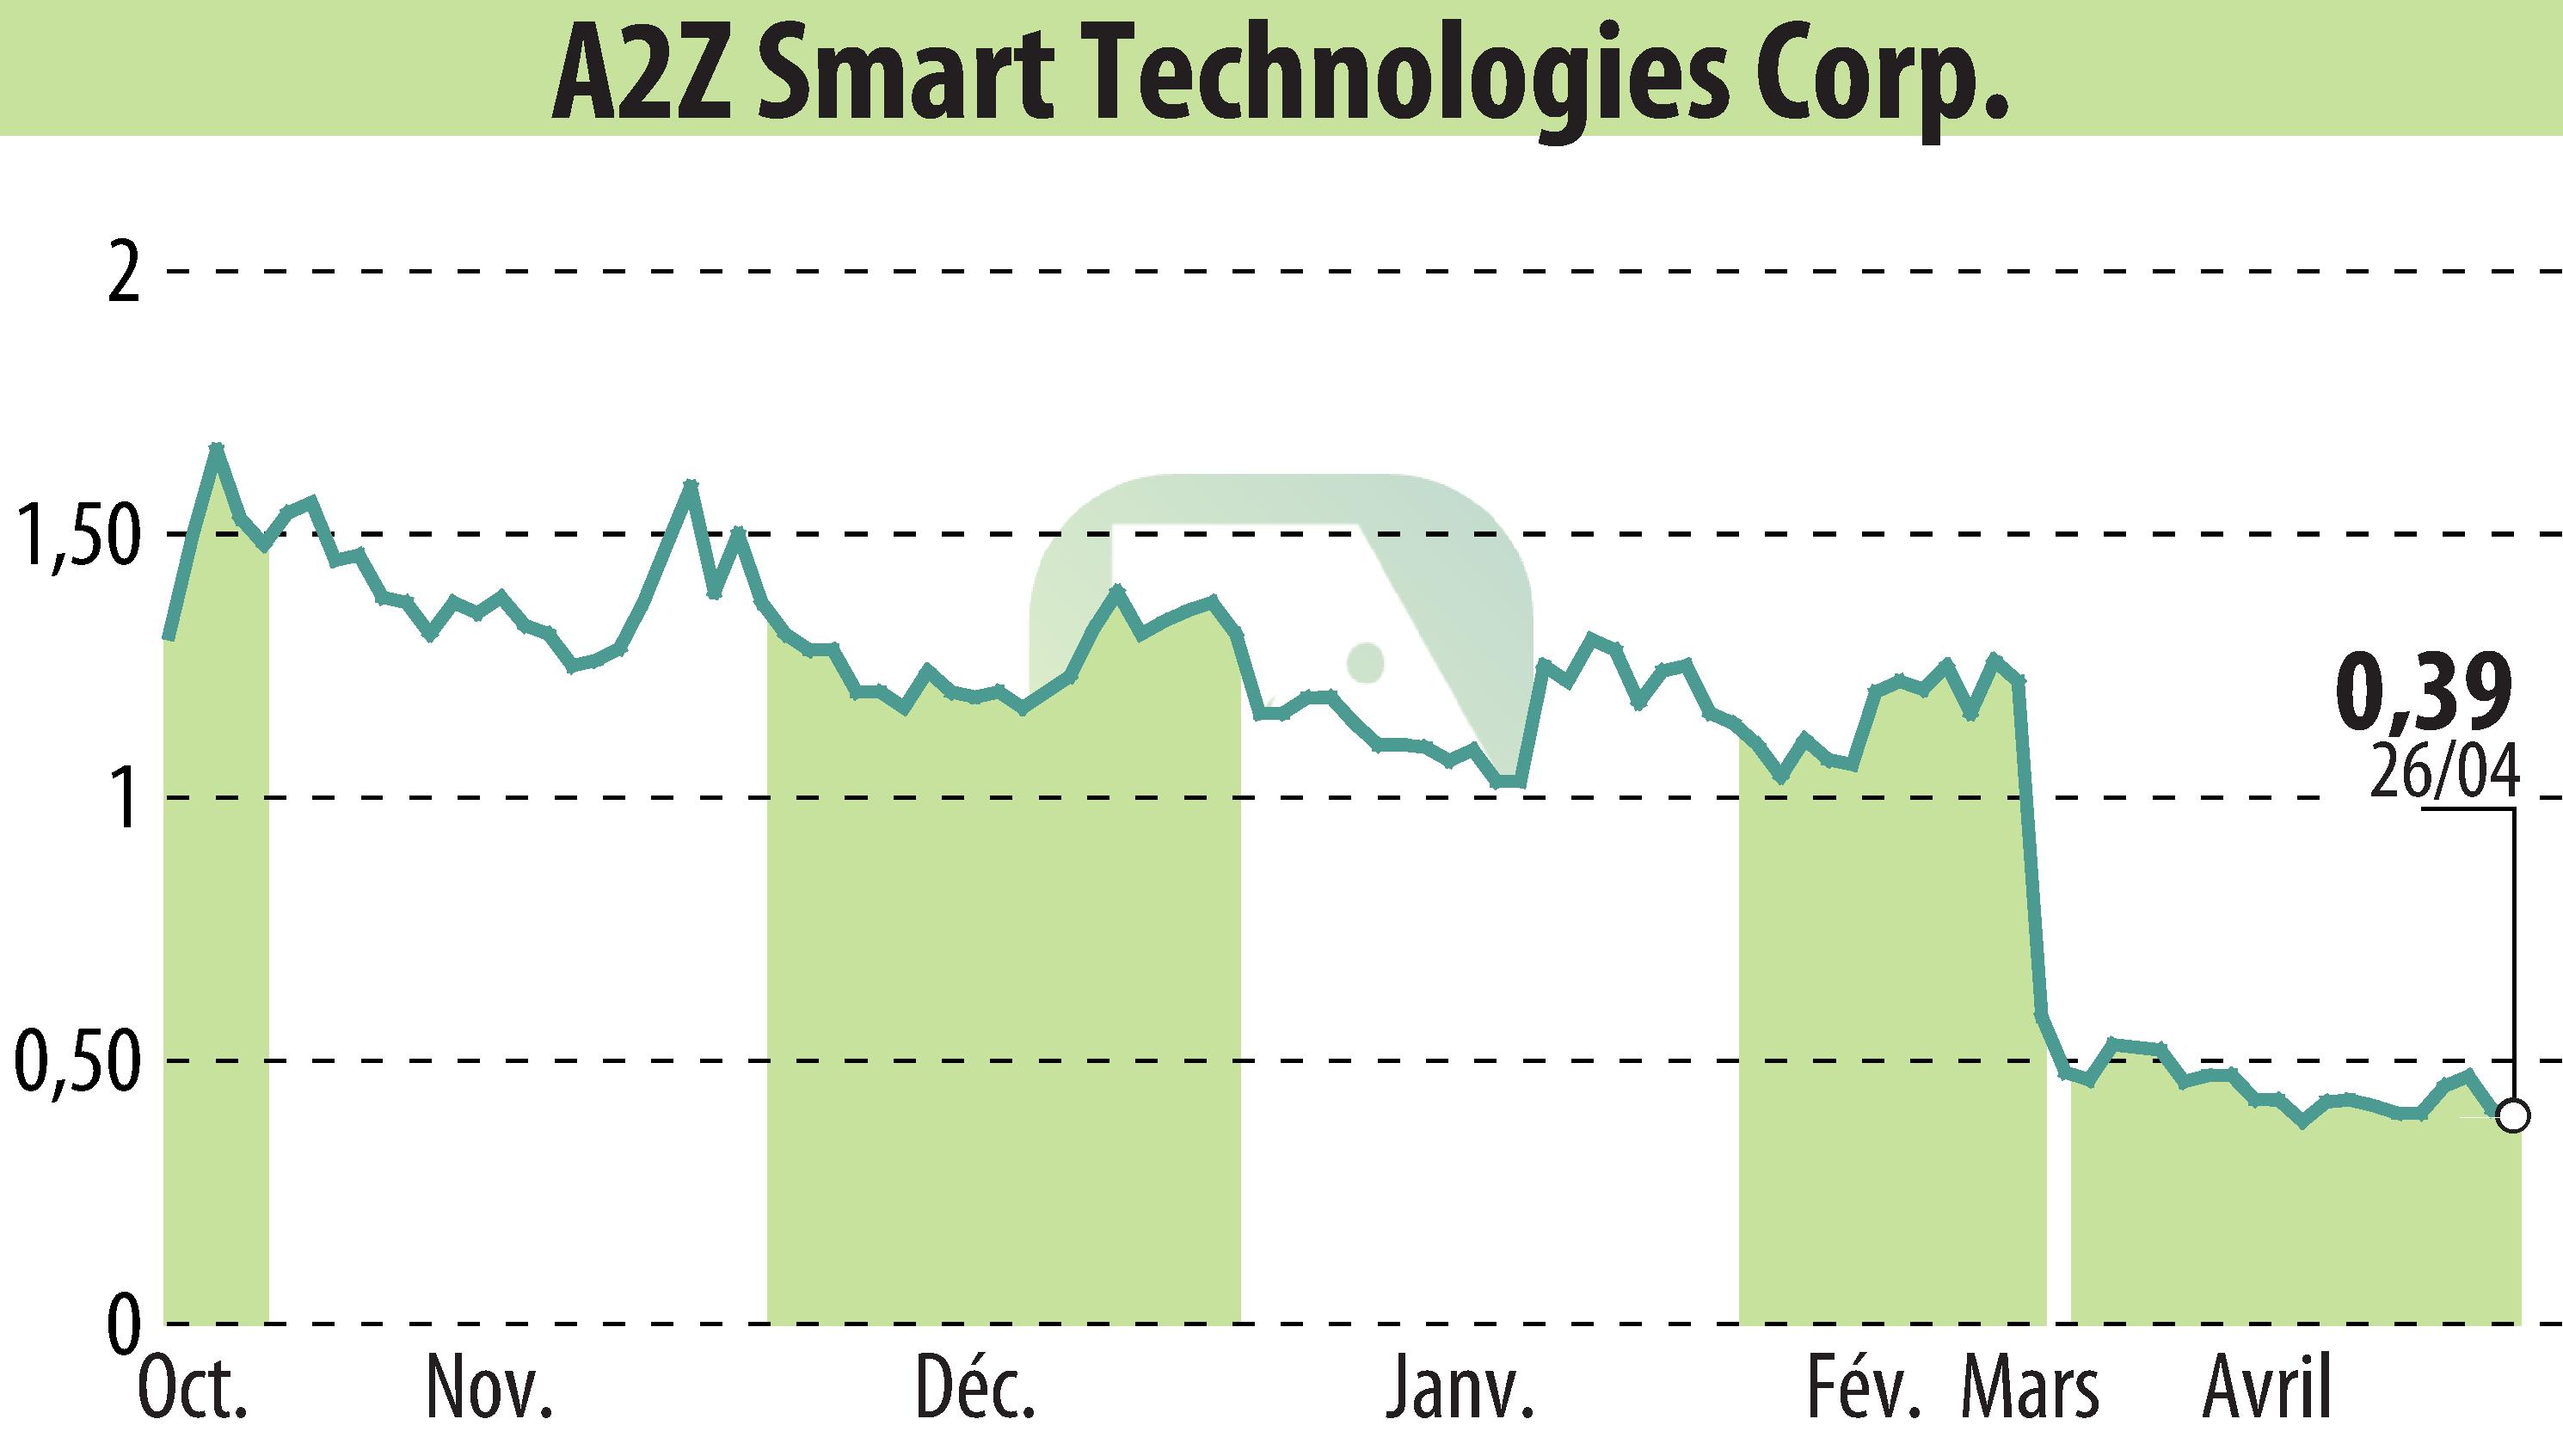 Stock price chart of A2Z Smart Technologies Corp. (EBR:AZ) showing fluctuations.